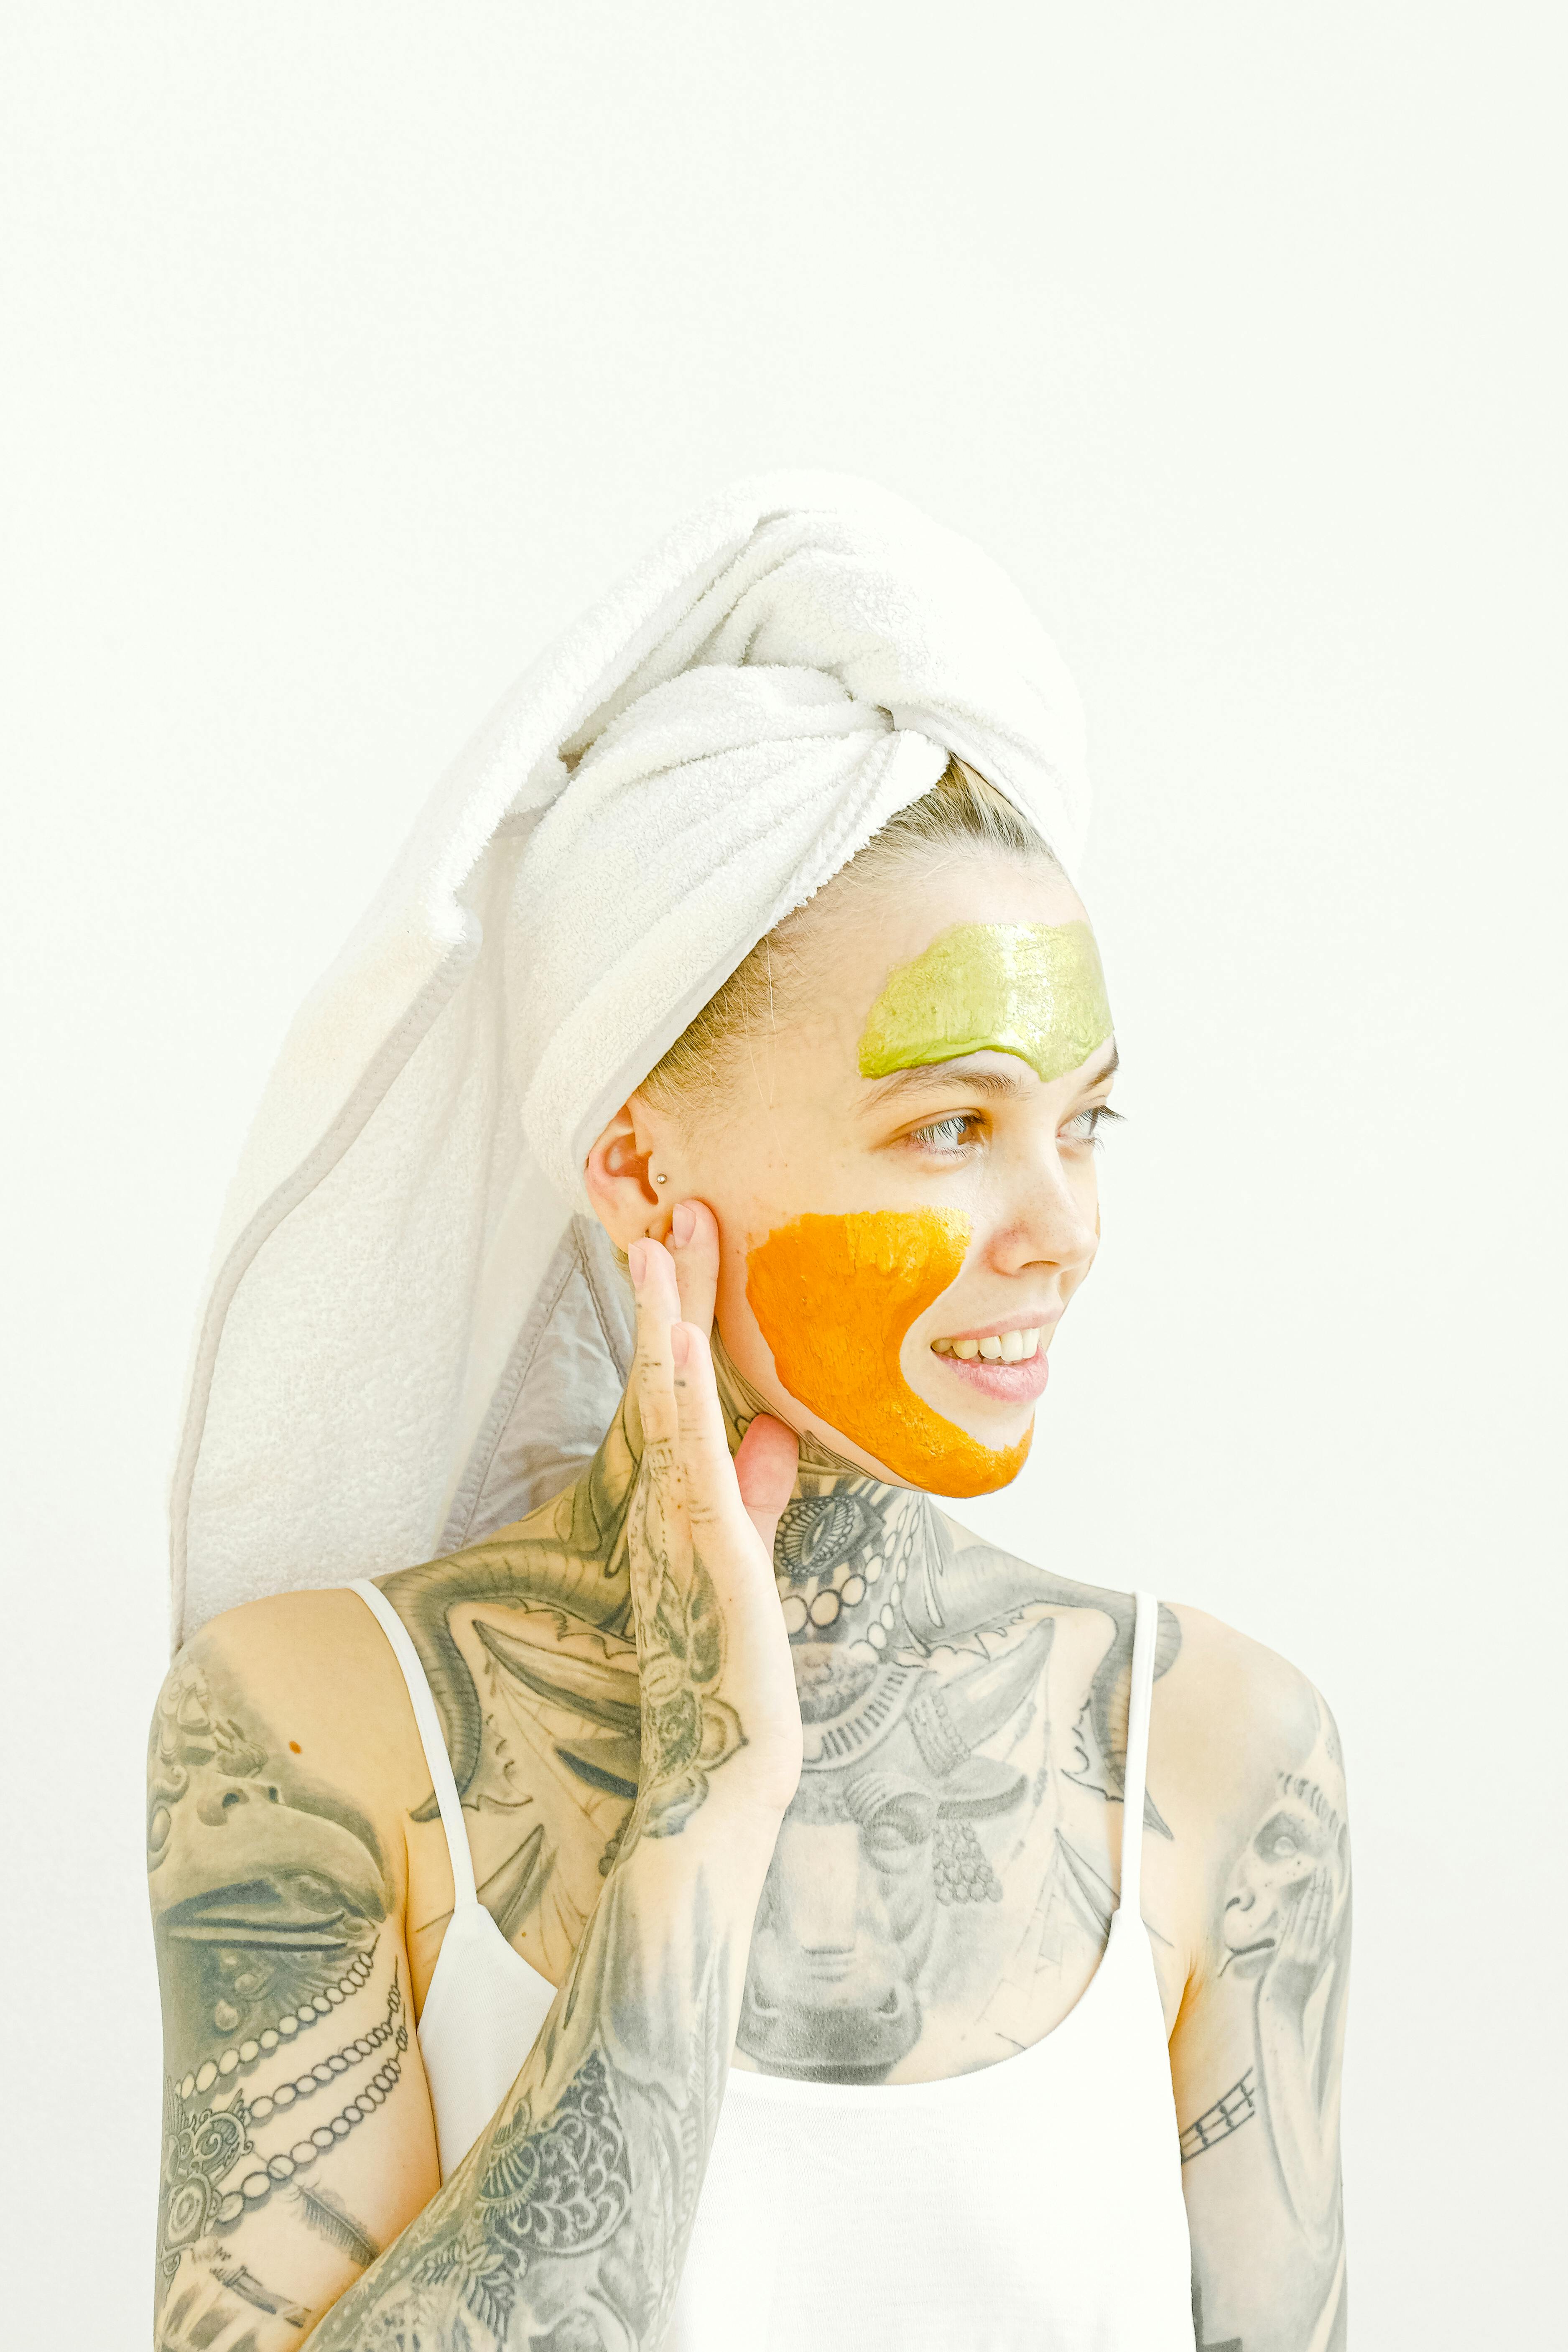 Woman with tattoos removing collagen mask from face \u00b7 Free Stock Photo